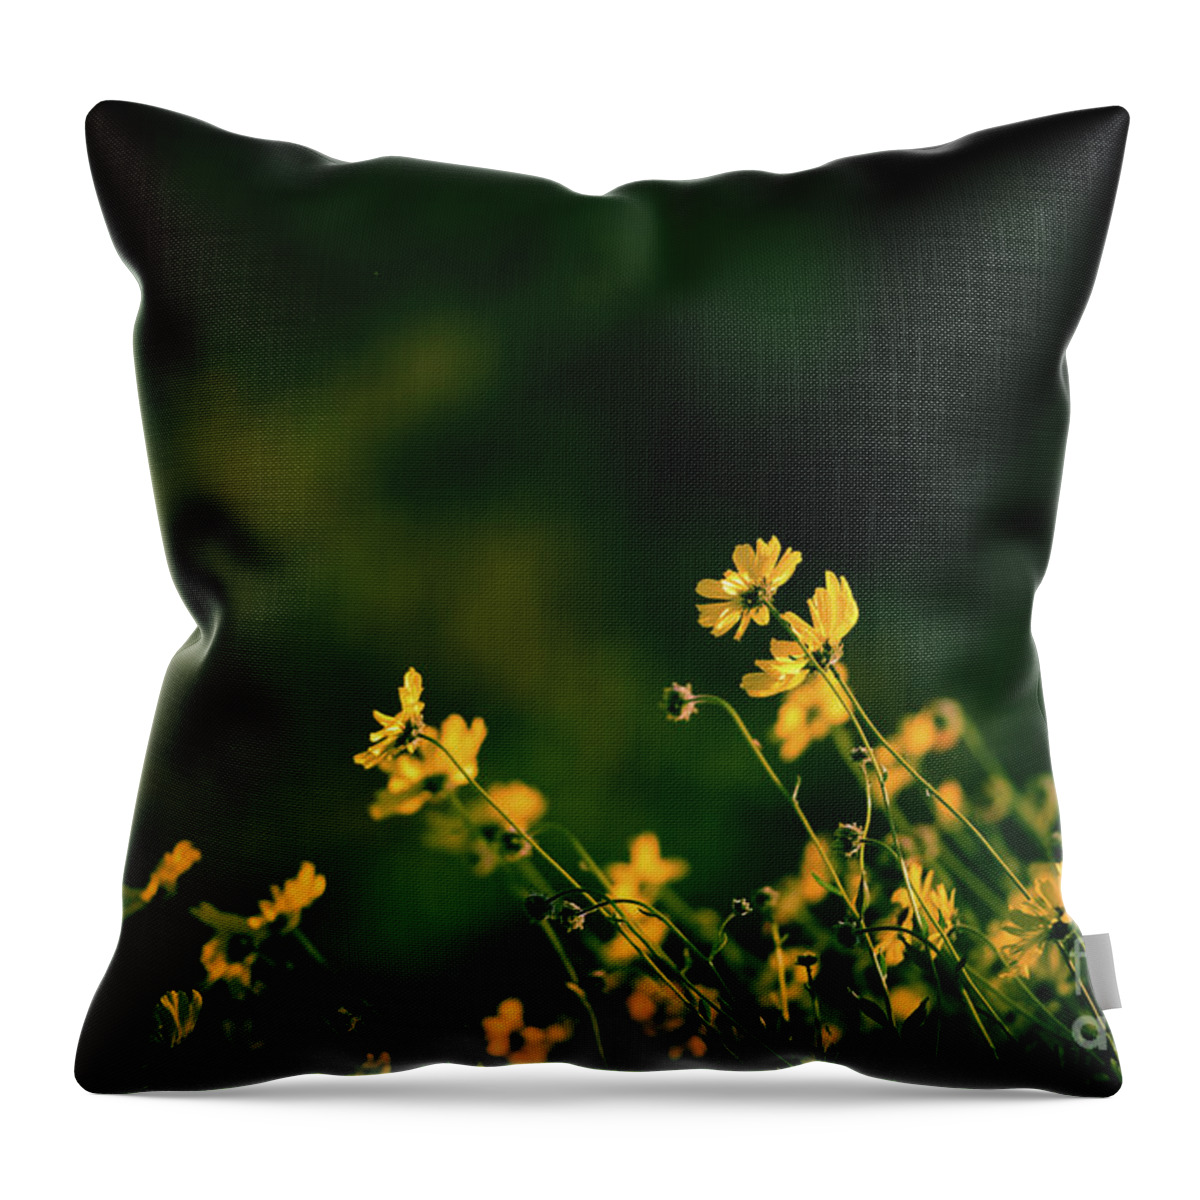 Wild Flowers Throw Pillow featuring the photograph Evening Wild Flowers by Kelly Wade